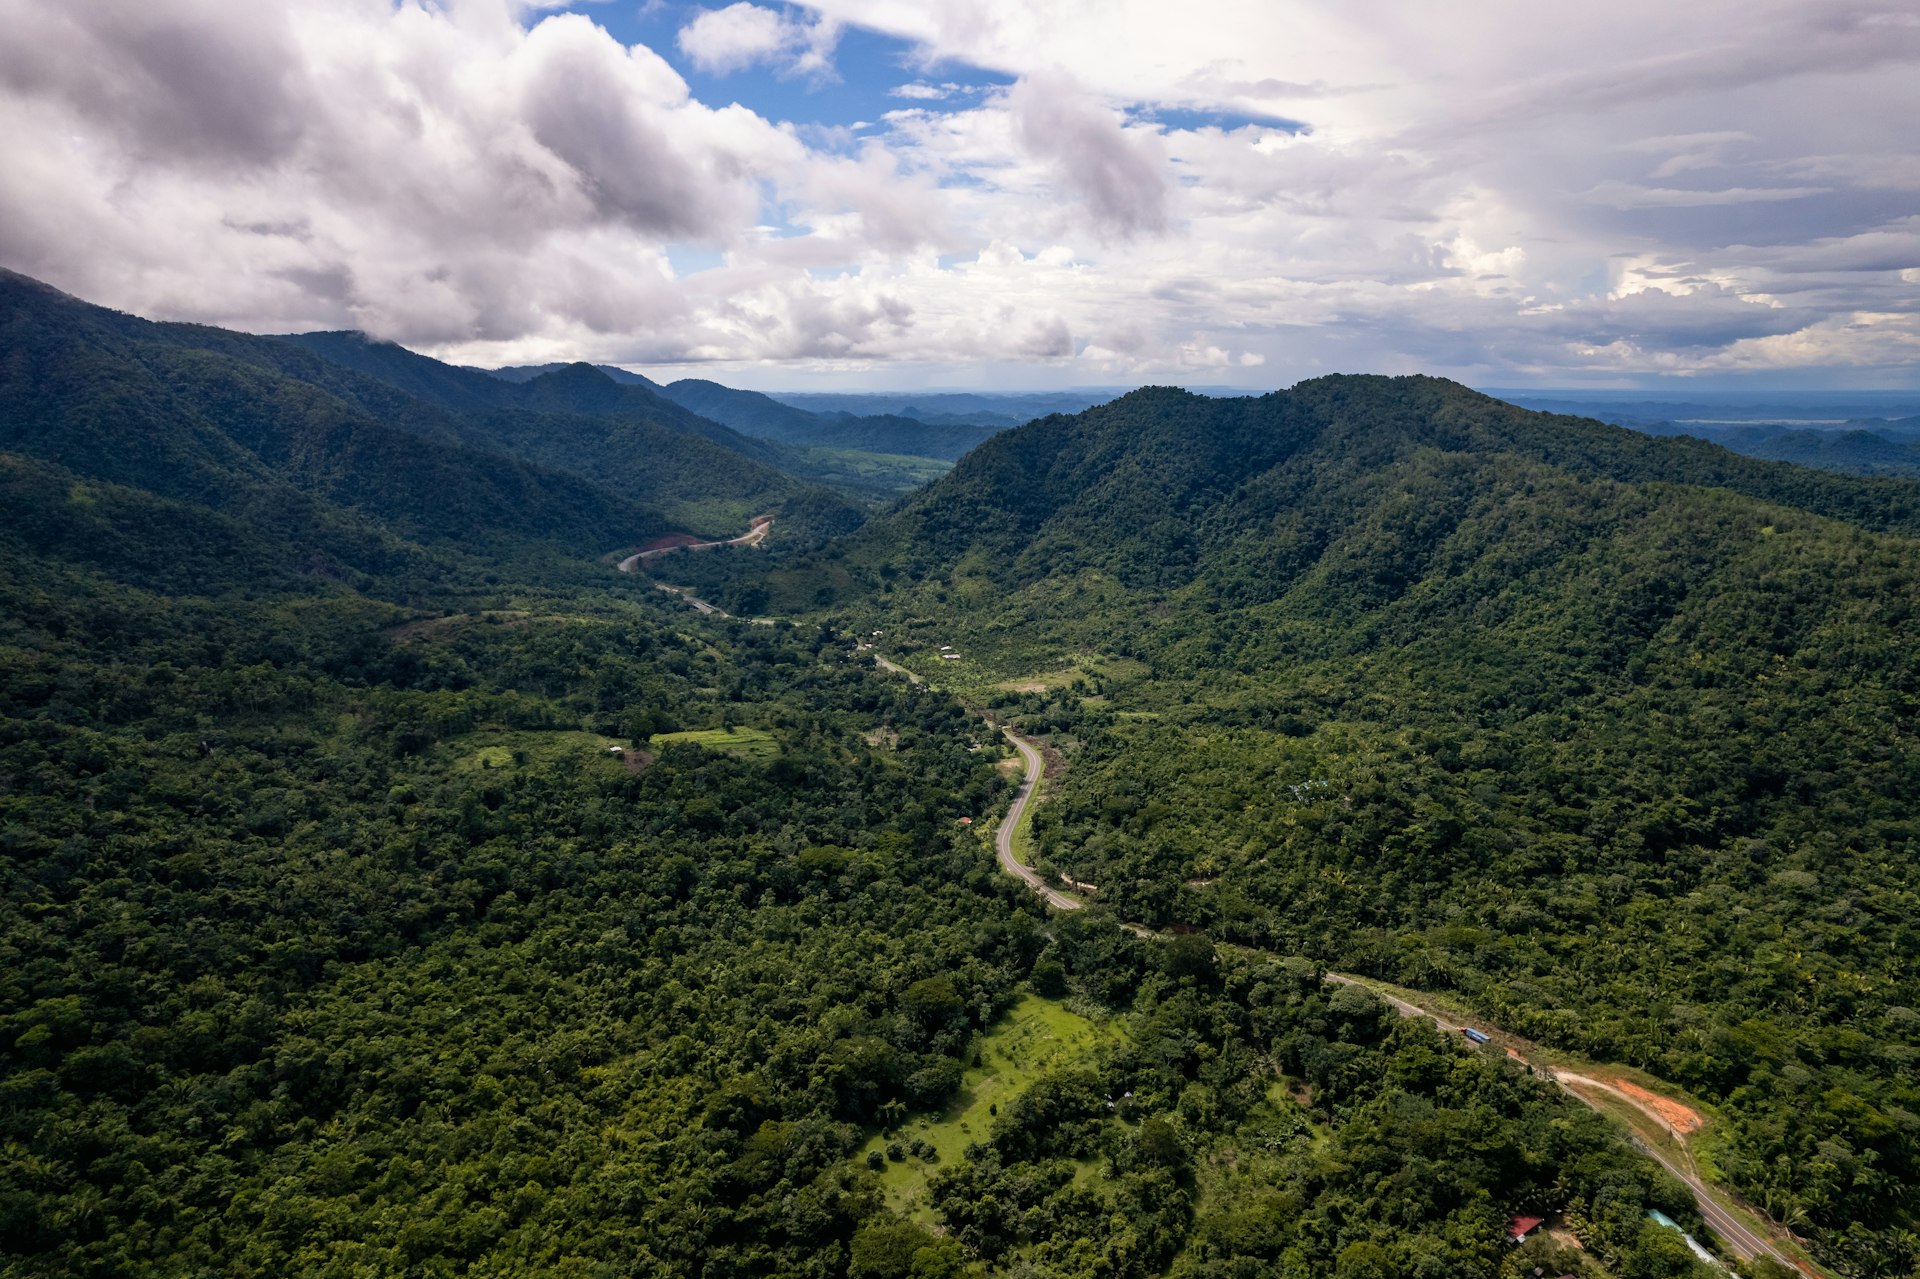 Drone photo of a valley along the Hummingbird Highway in Belize with a cloudy sky.